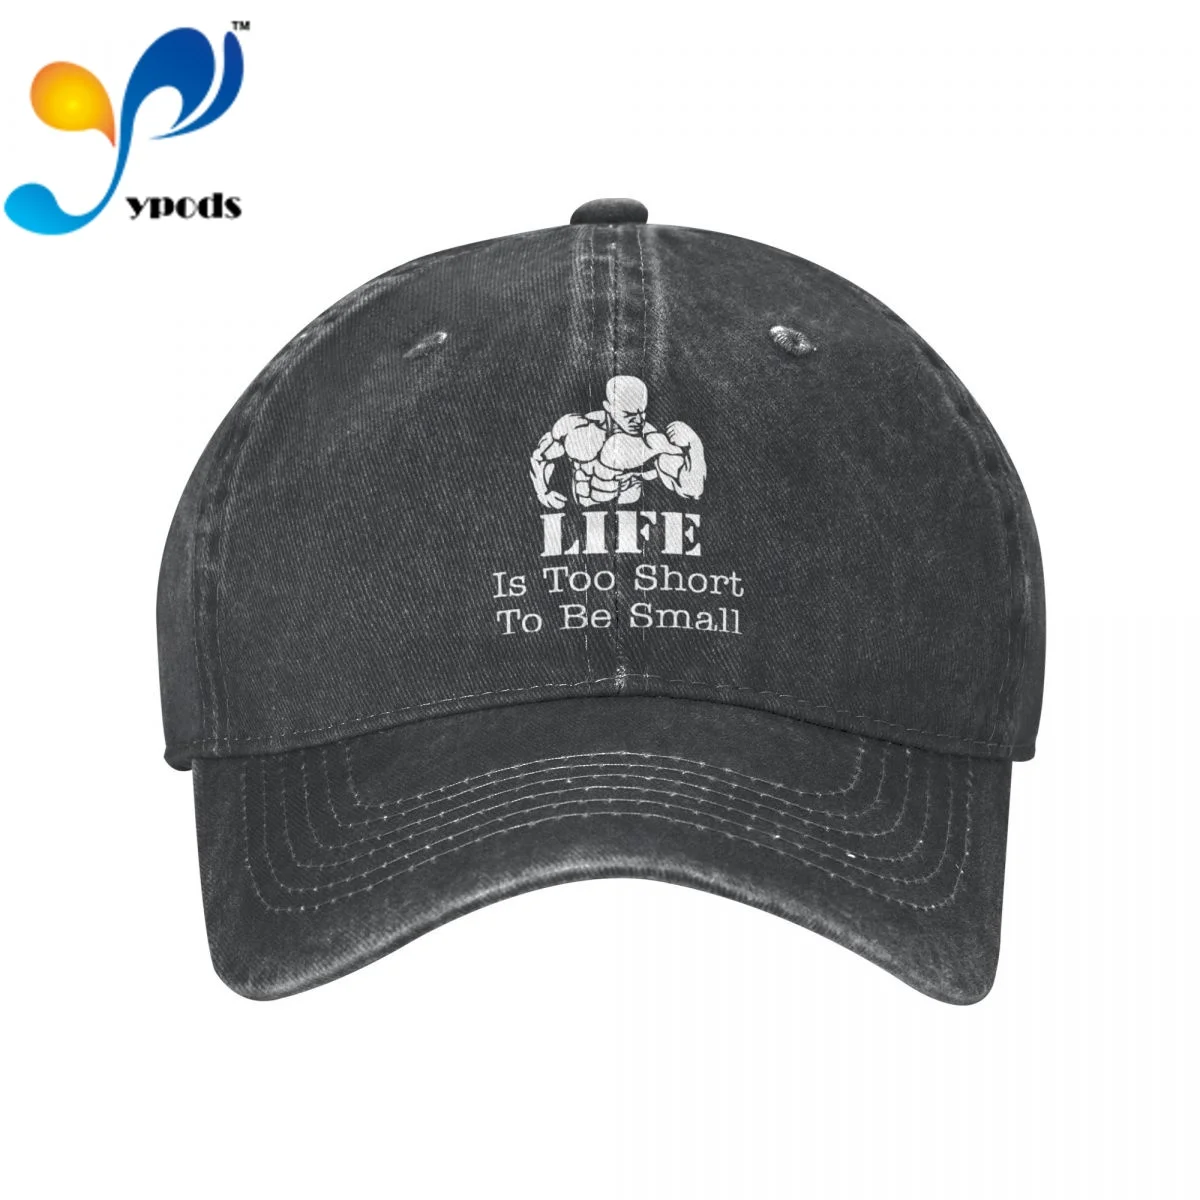 

LIFE Is Too Short To Be Small Bodybuilder Cotton Cap For Men Women Gorras Snapback Caps Baseball Caps Casquette Dad Hat